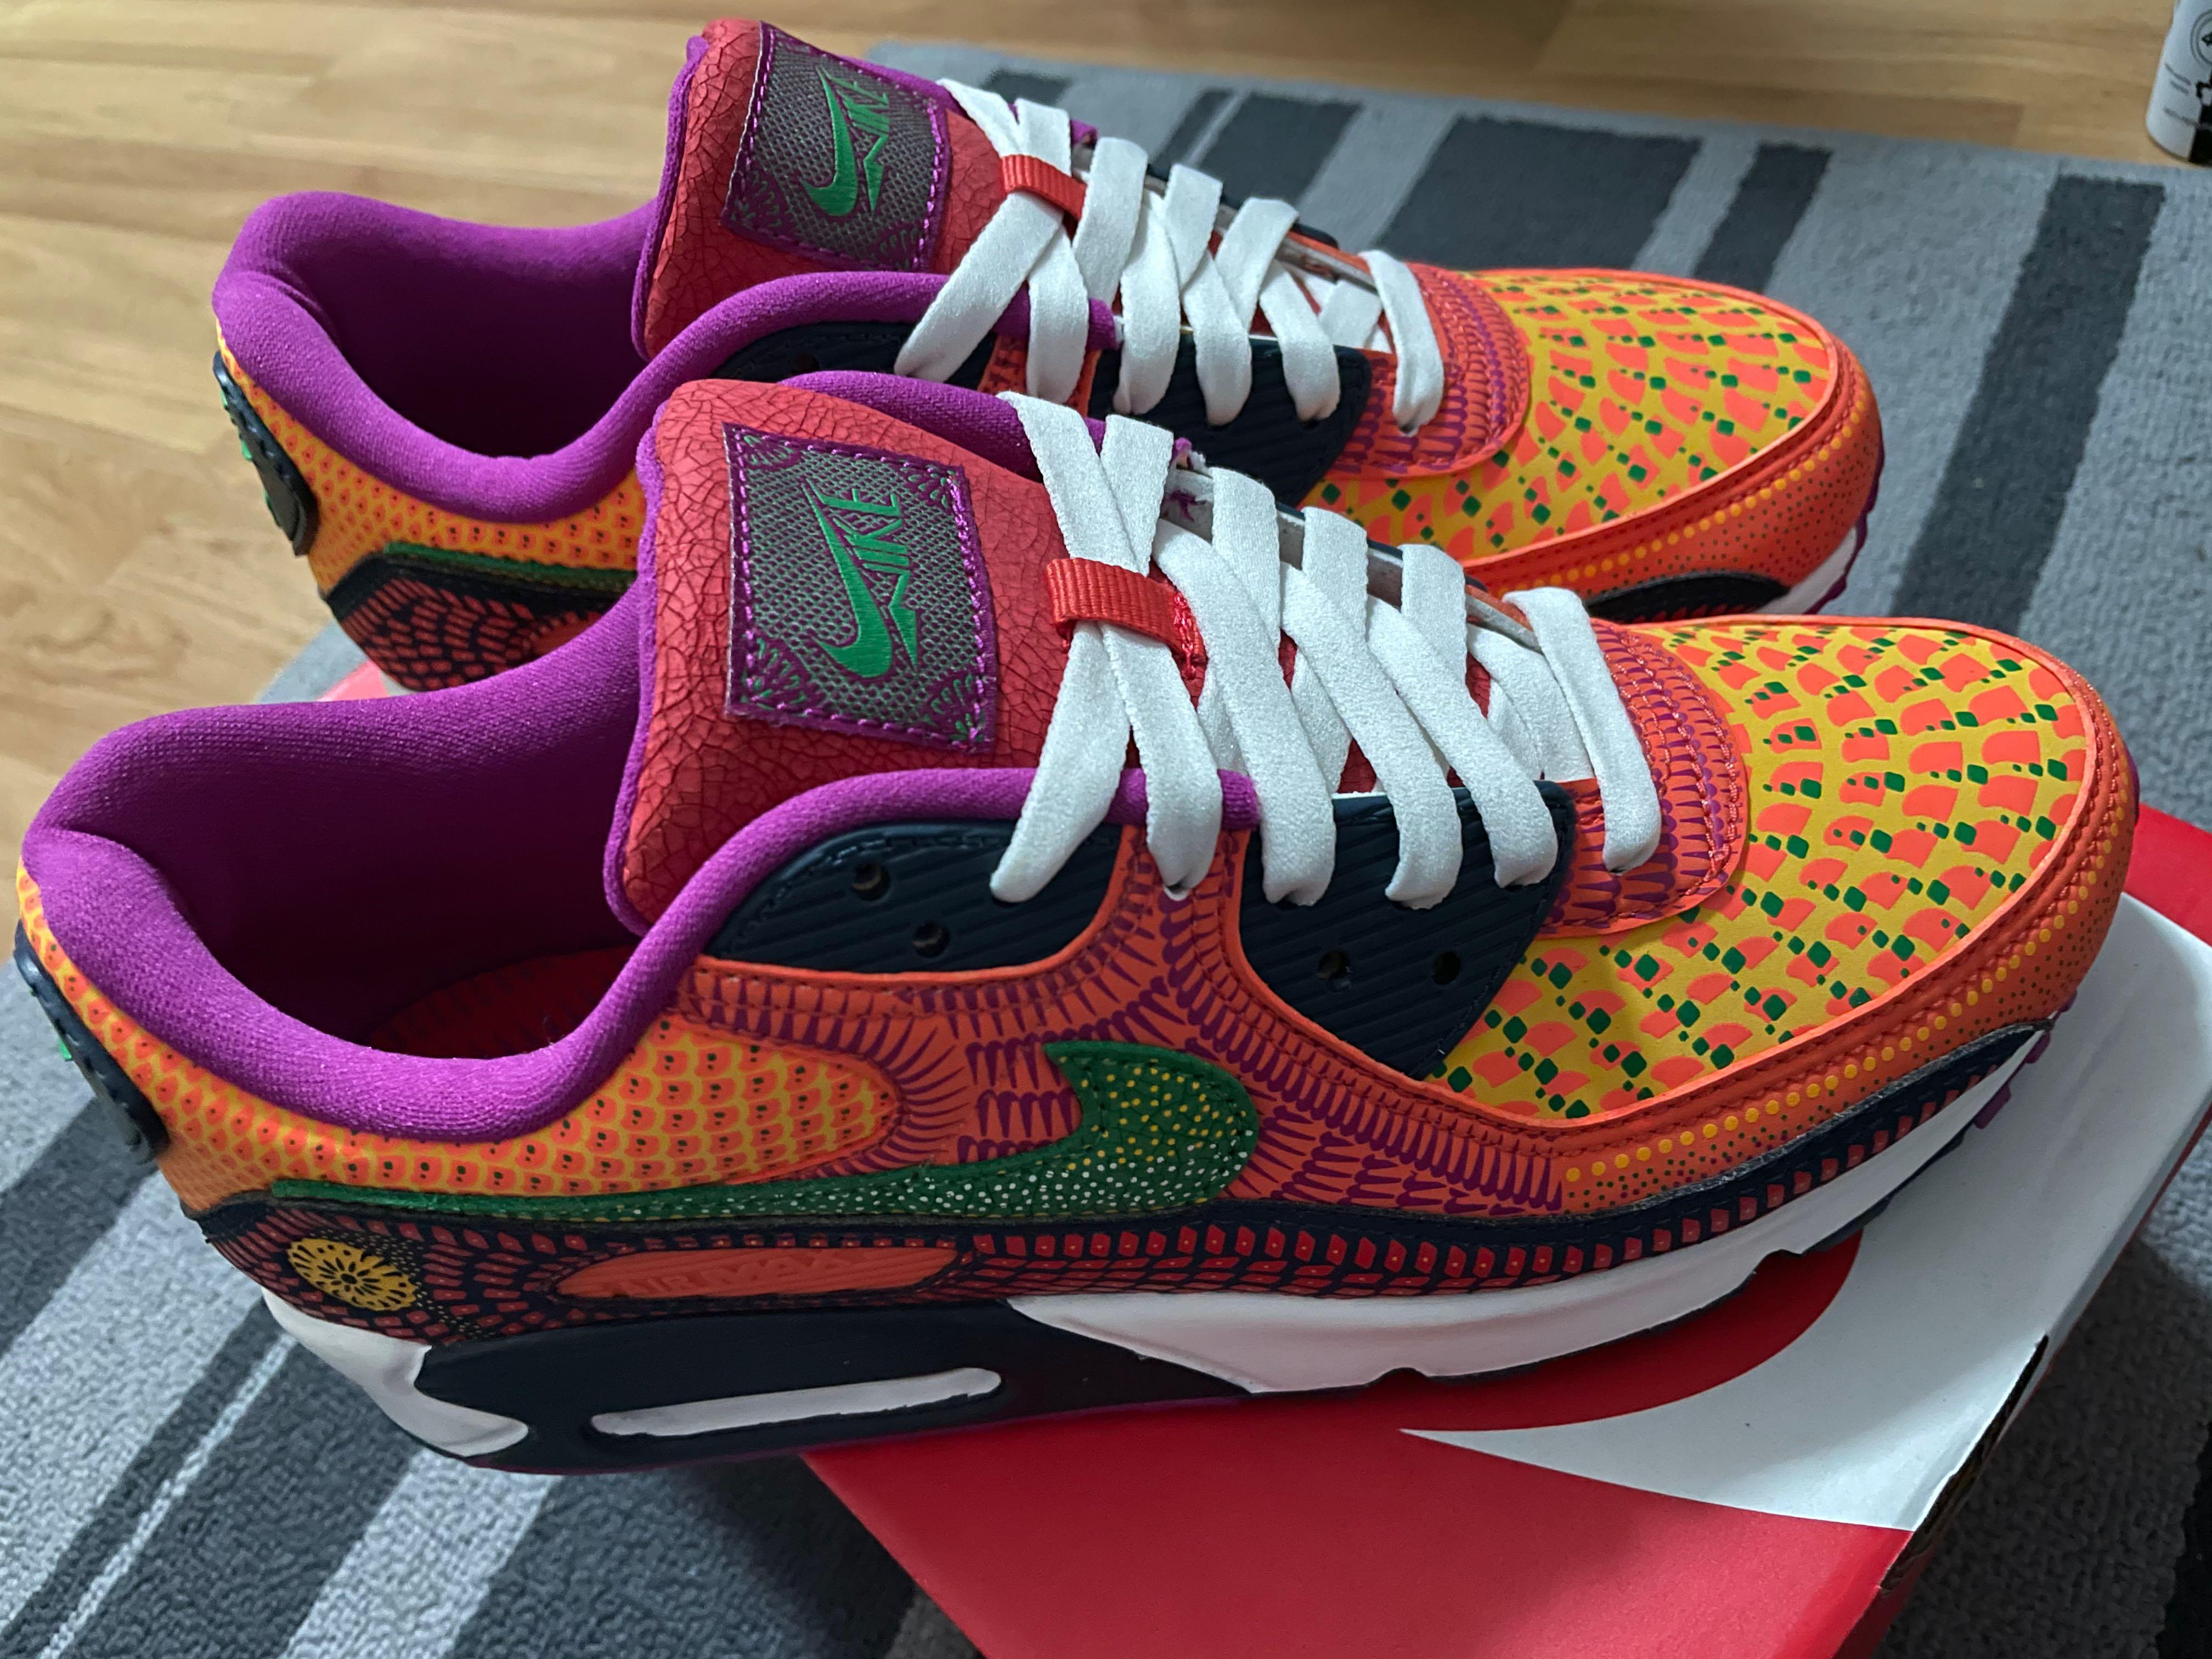 Uk6 Nike Air Max 90 Dia De Los Muertos Day Of The Dead Men S Fashion Footwear Sneakers On Carousell